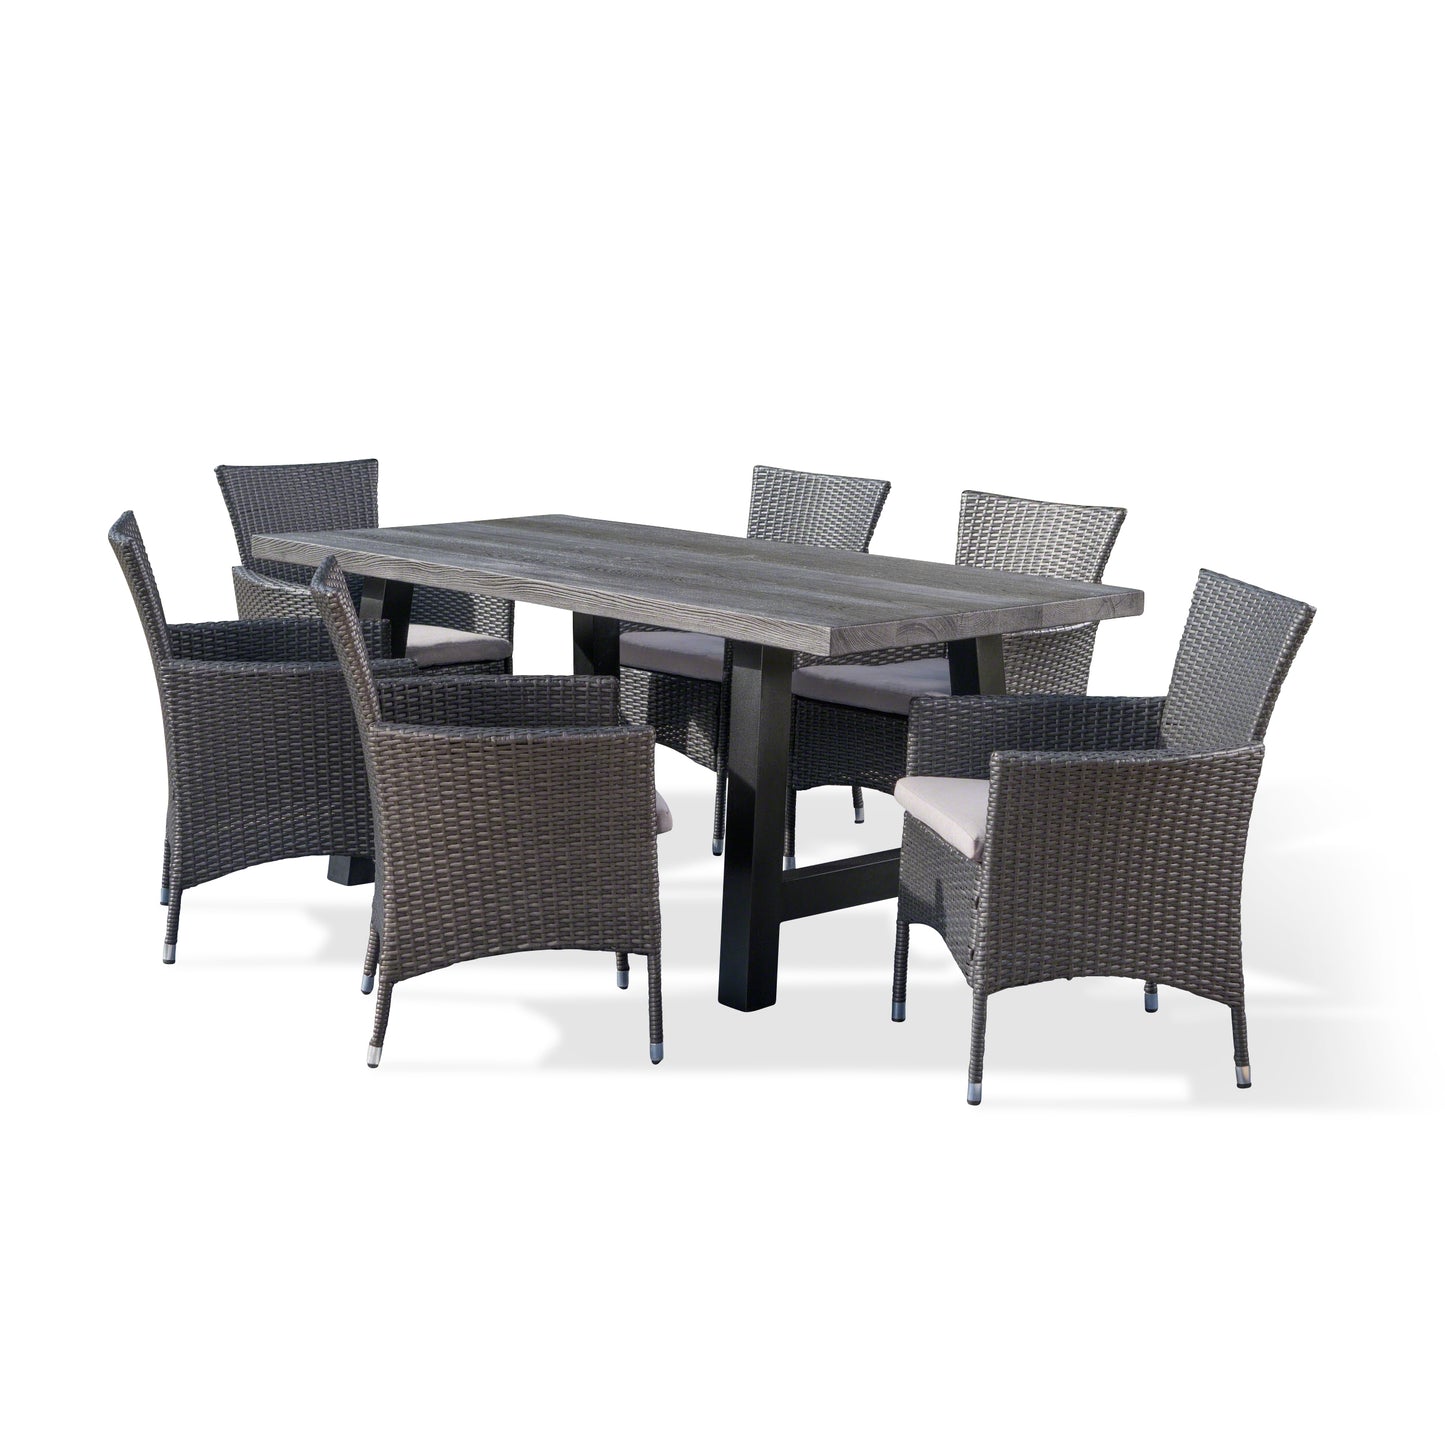 Gina Outdoor 7 Piece Wicker Dining Set with Light Weight Concrete Table